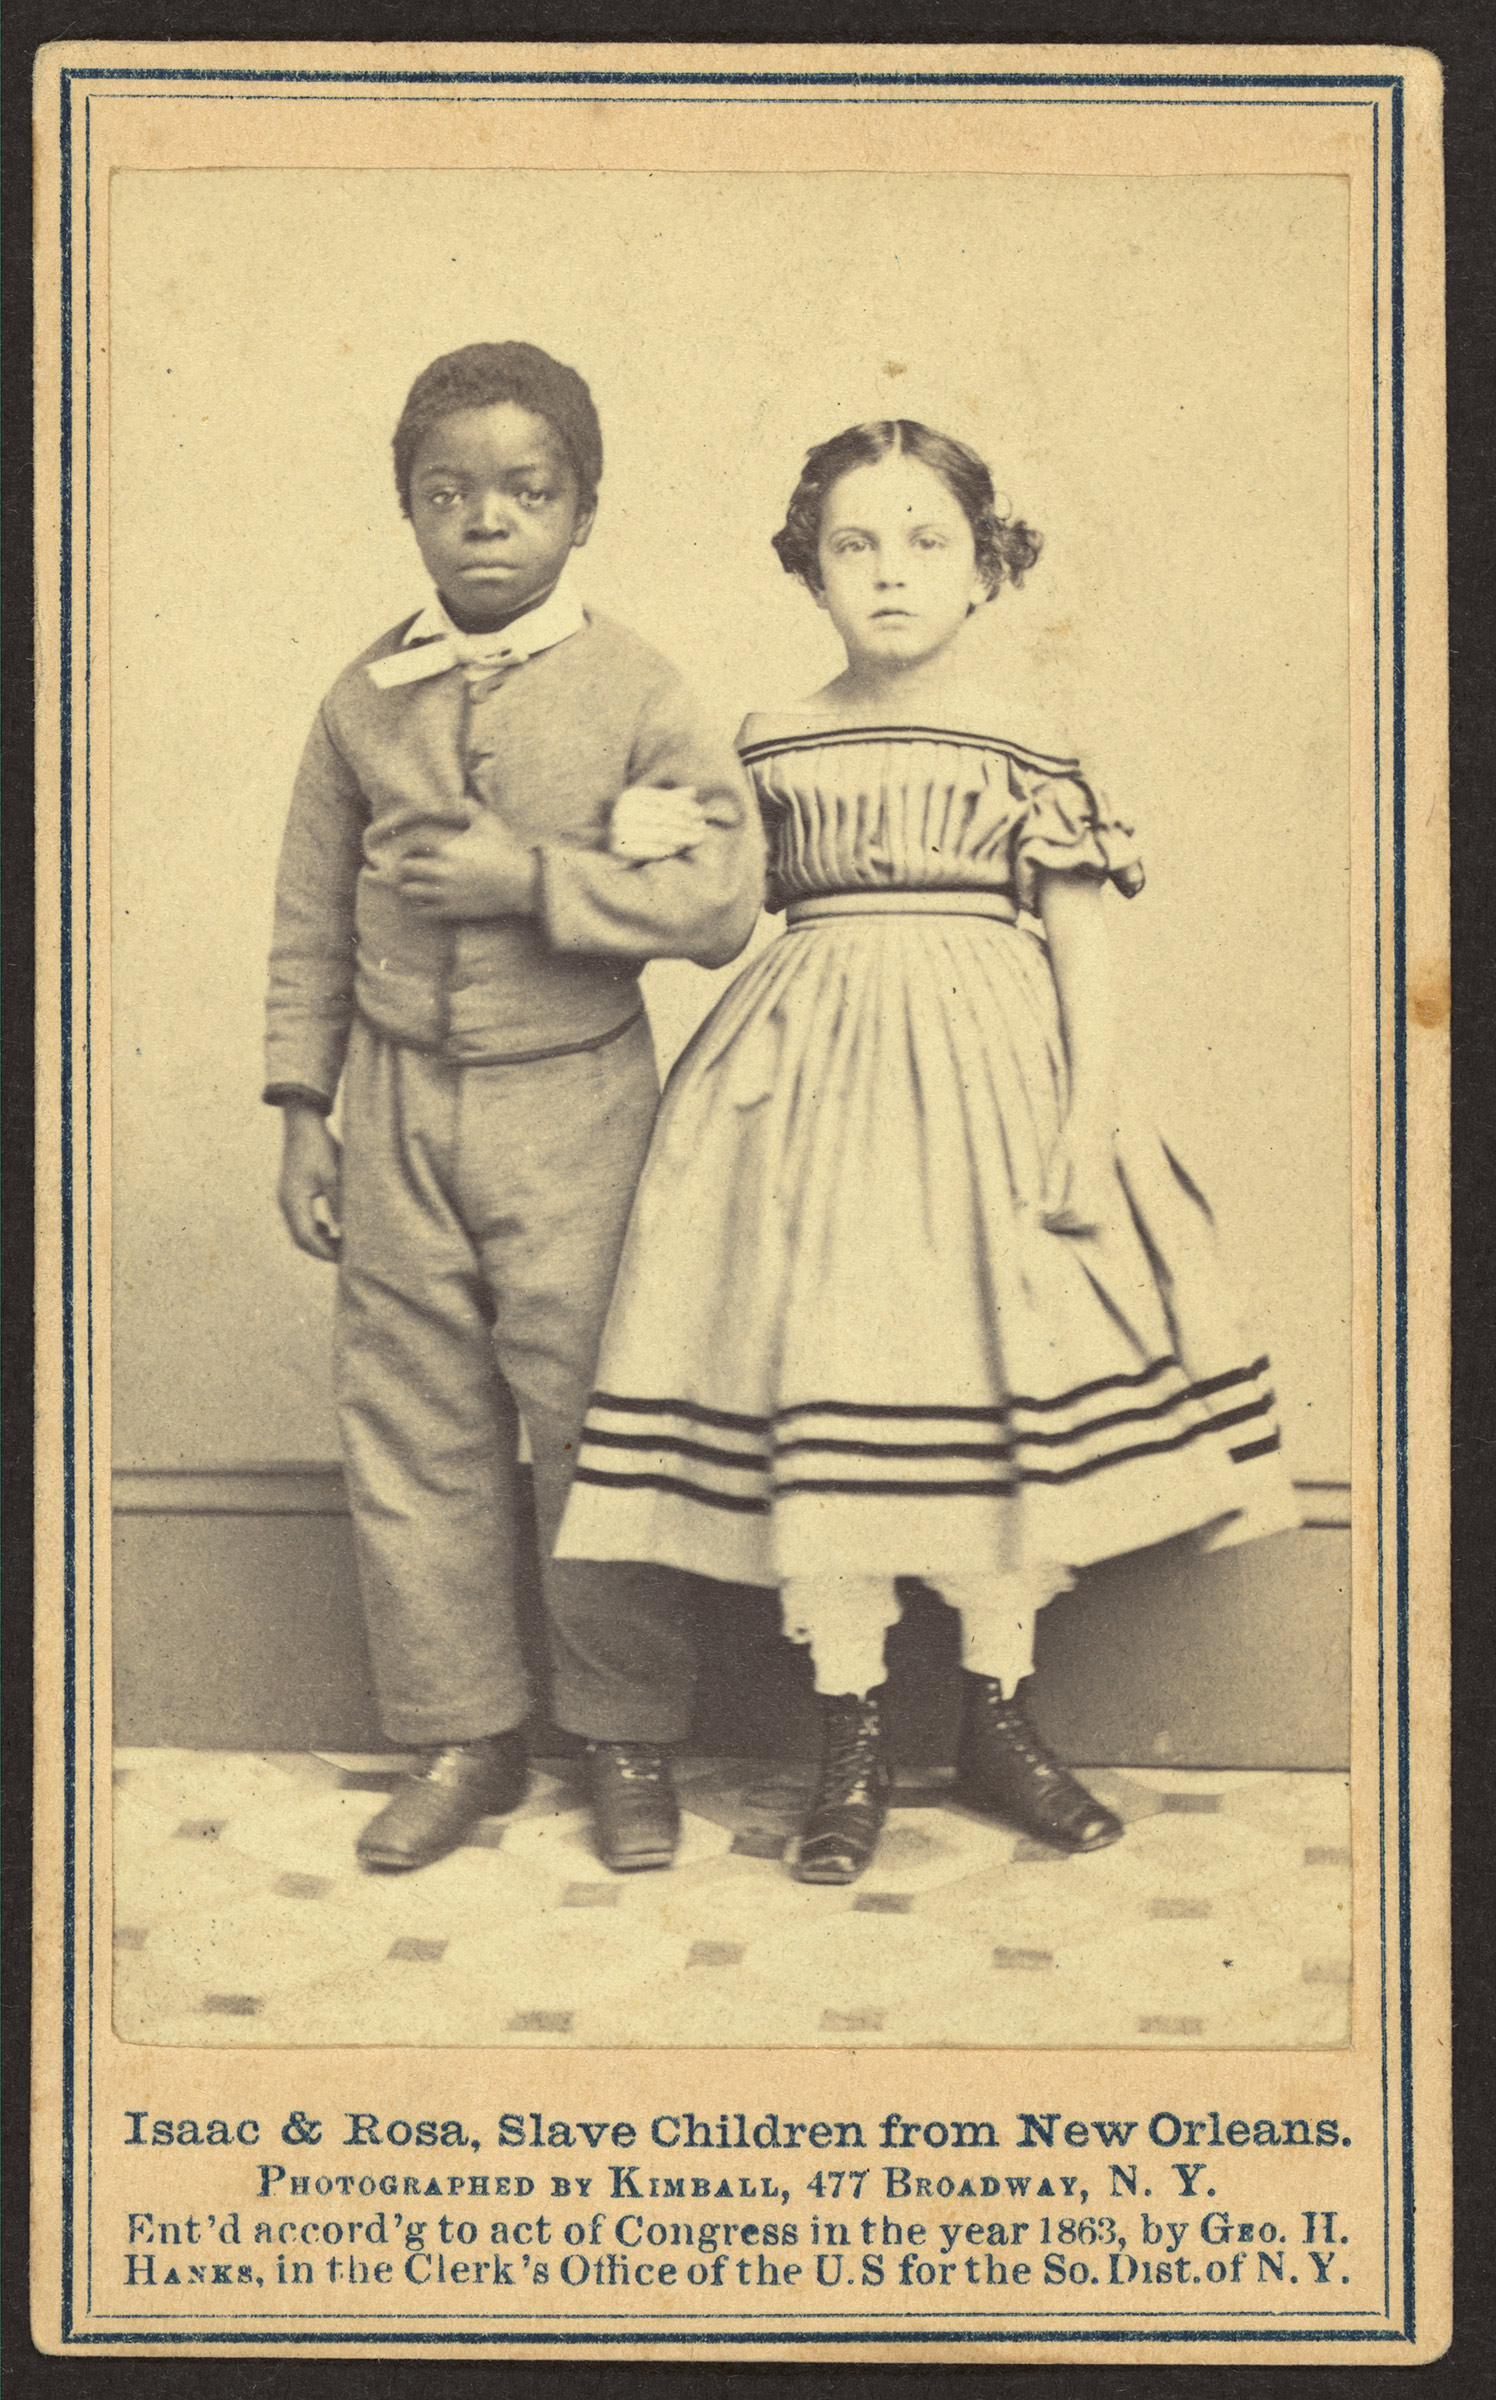 An image of "Isaac &amp; Rosa, slave children from New Orleans," in 1863. Their photo was among the source materials for the engraving that appeared in Harper's Weekly. (Library of Congress)